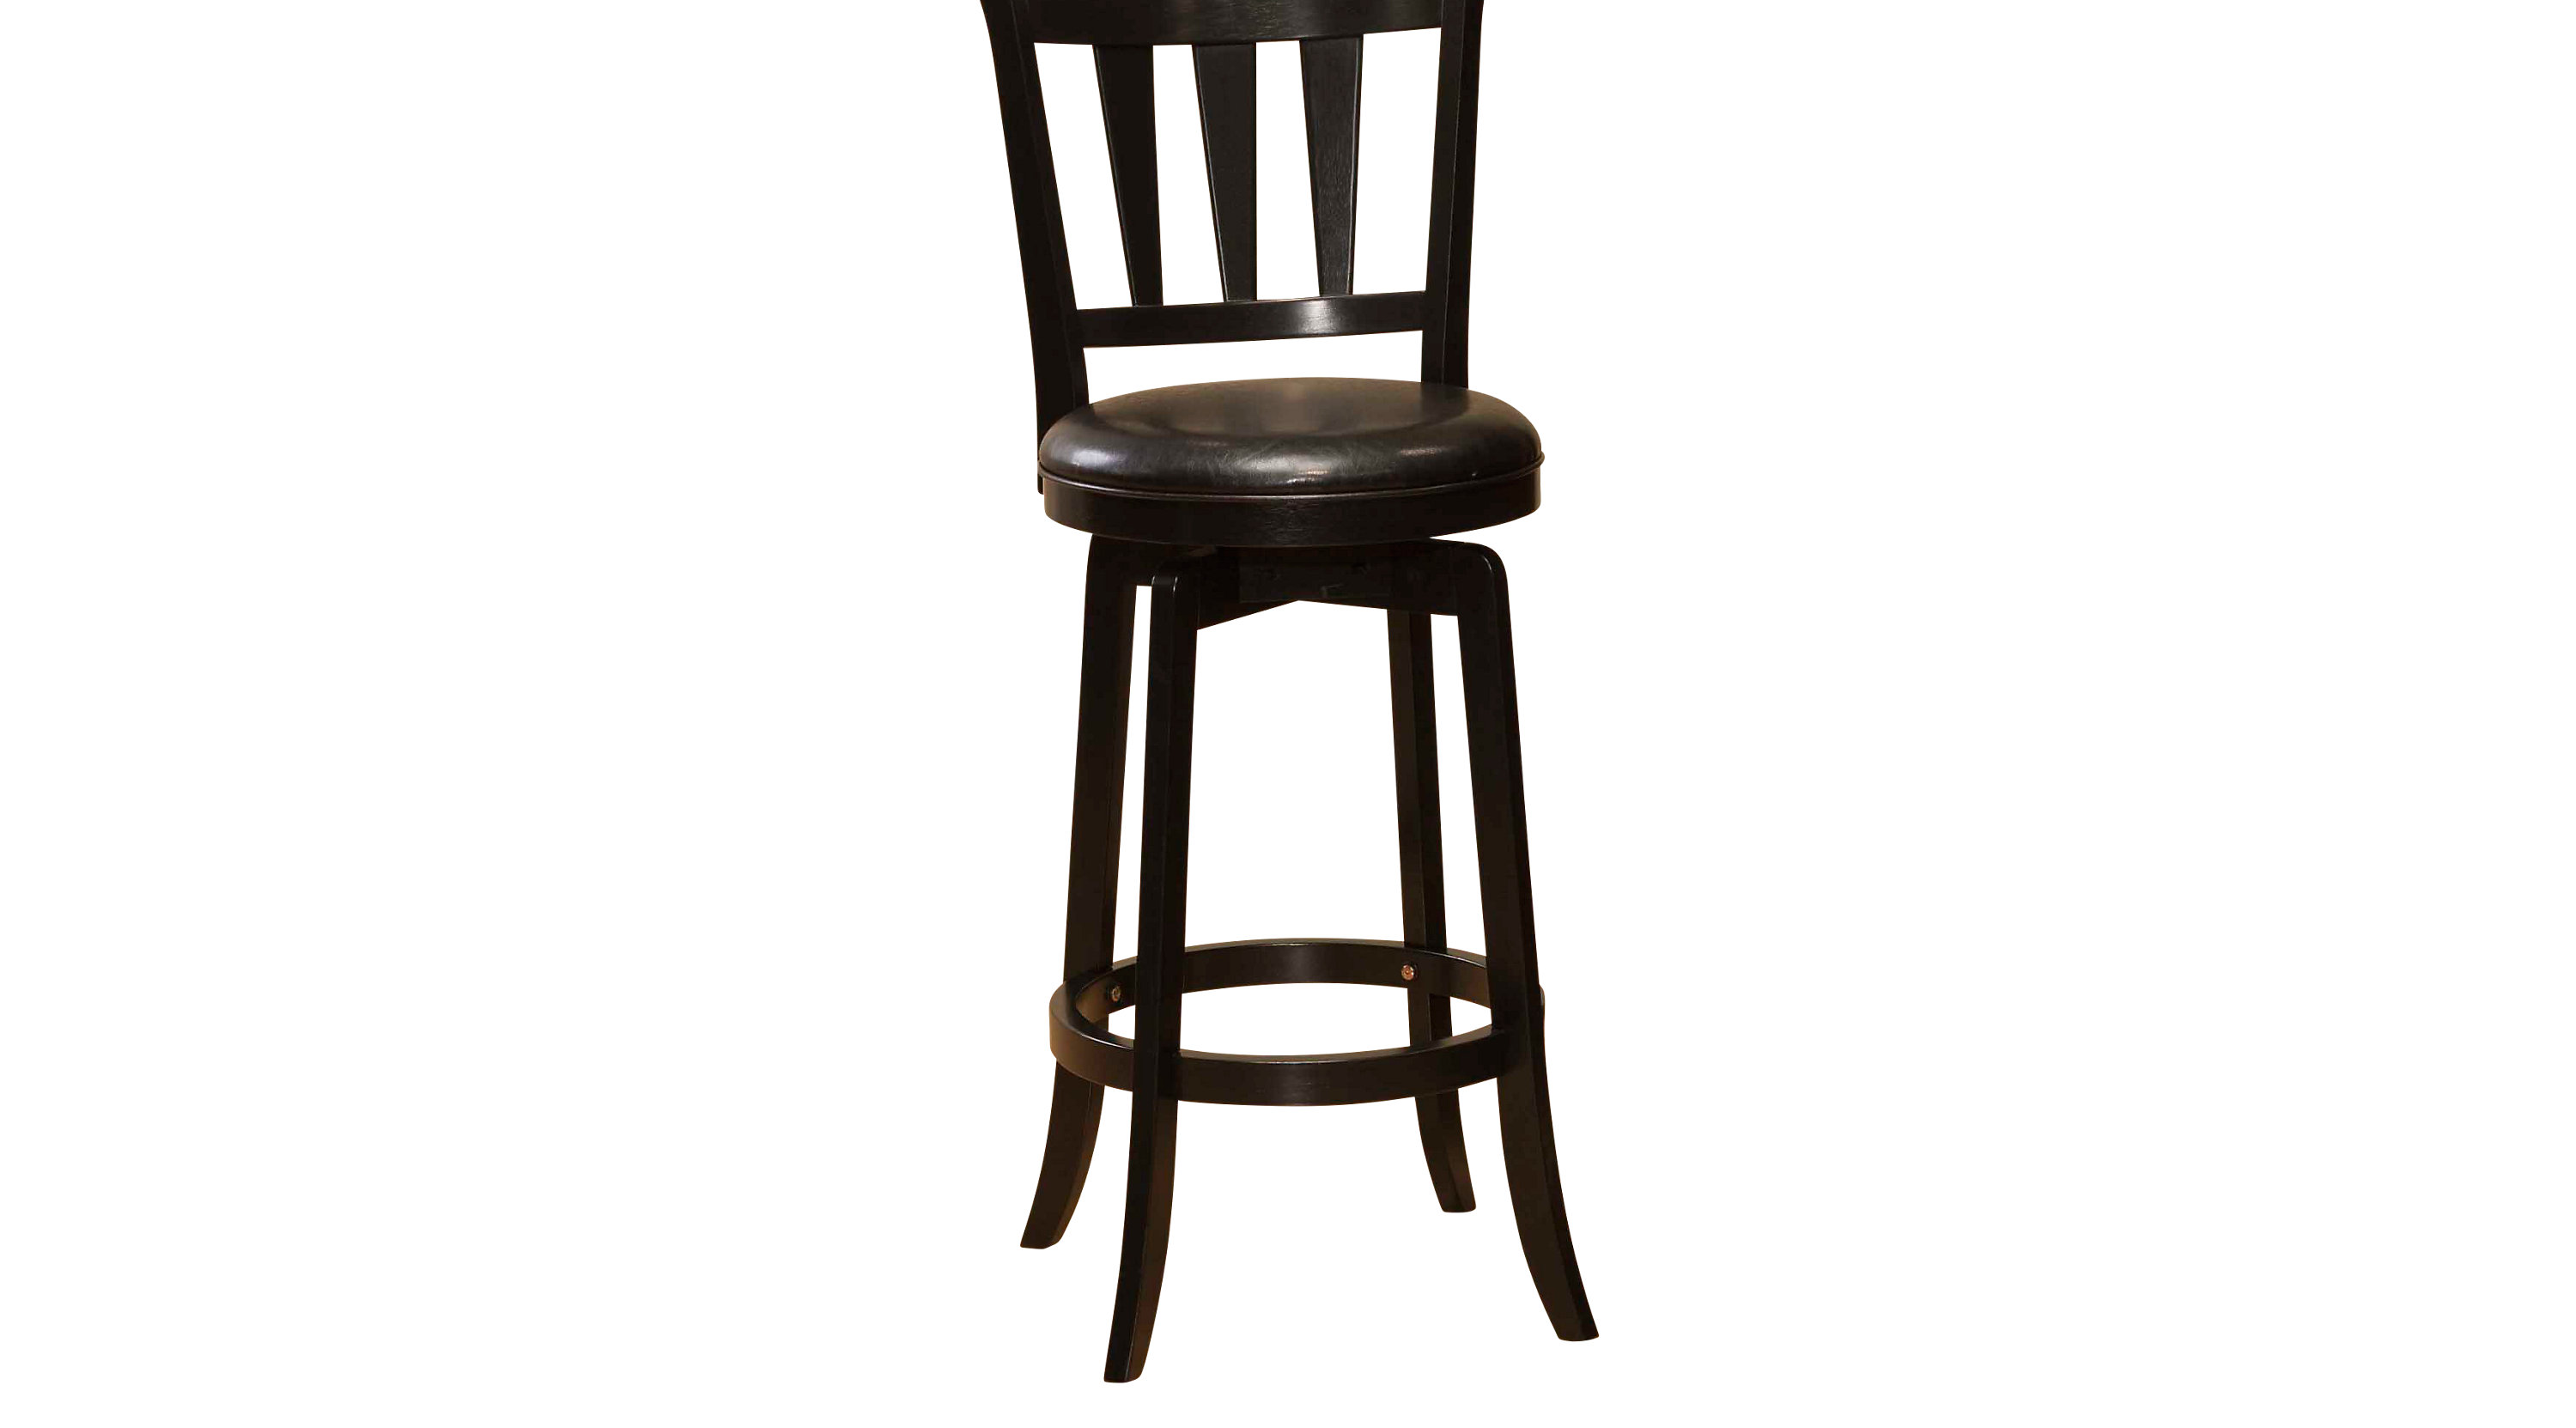 Presque Isle Black Counter Height Stool - Transitional